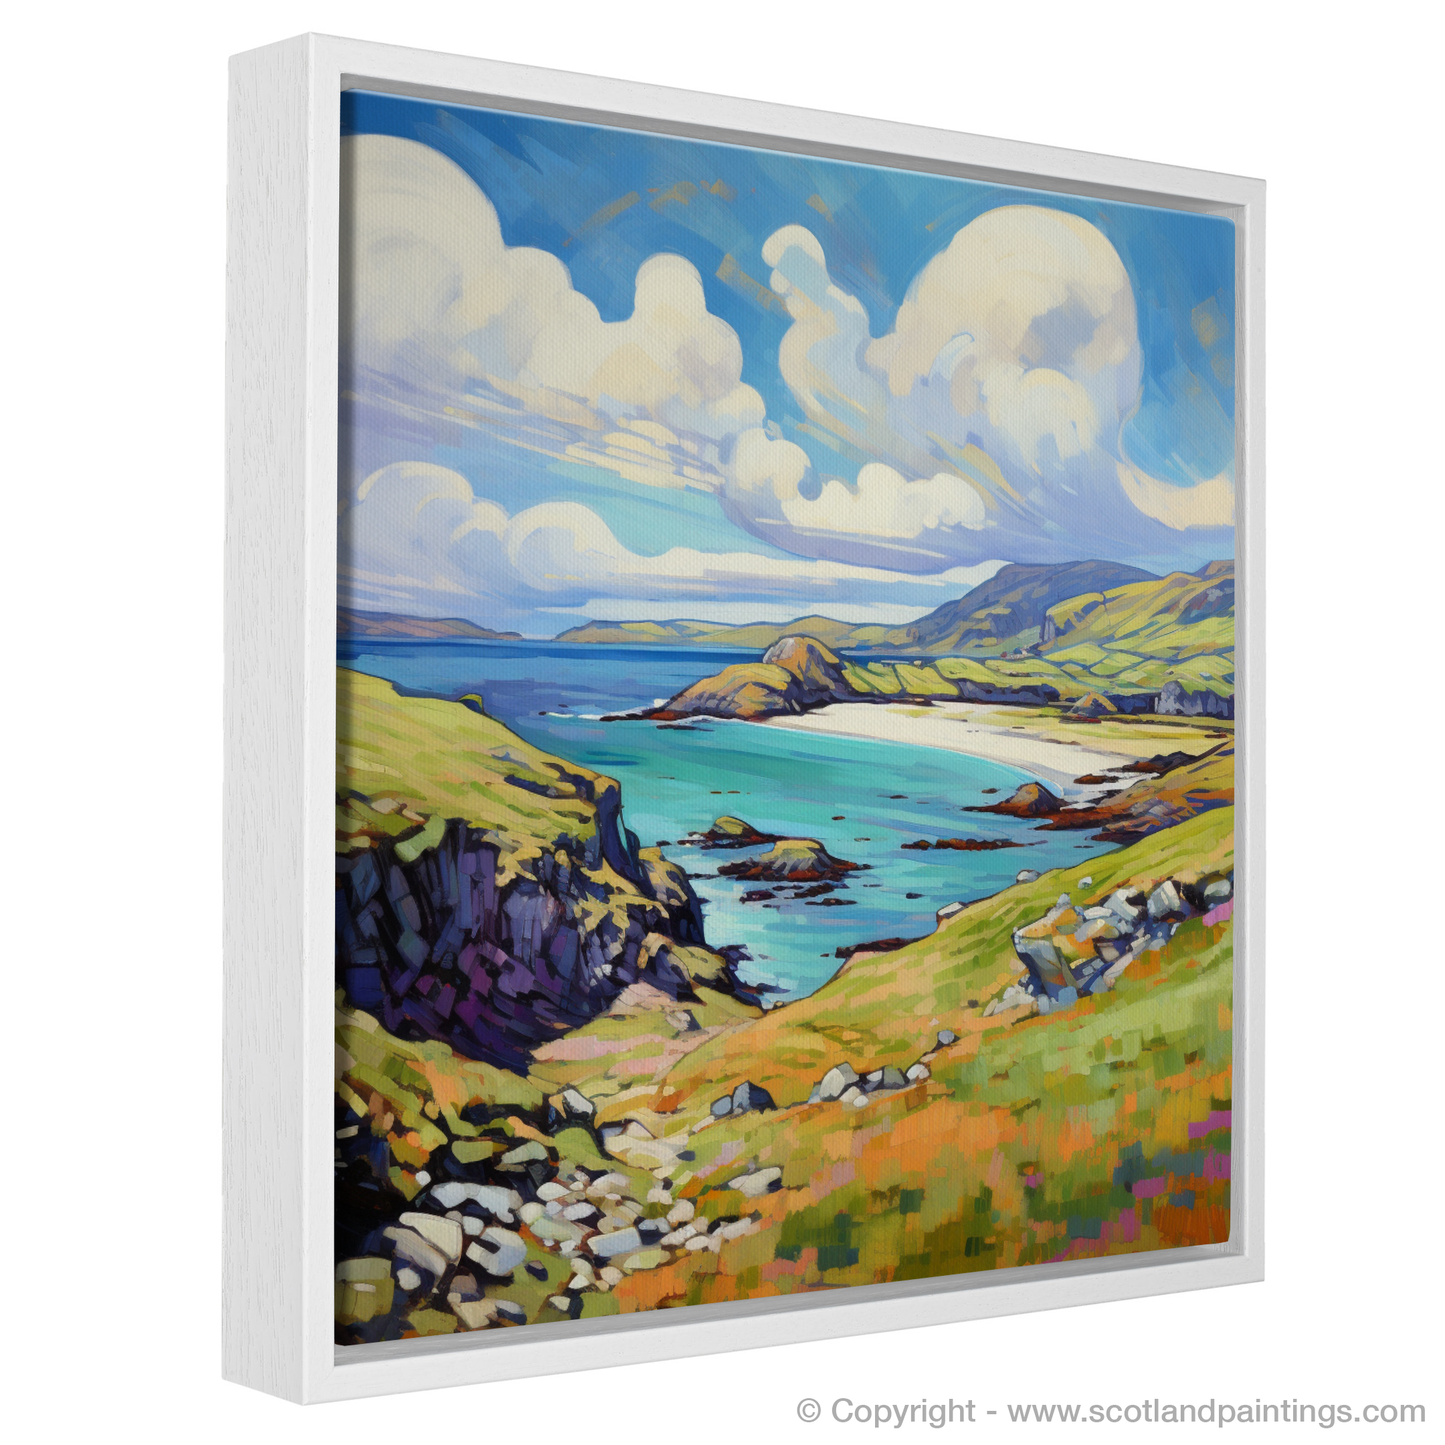 Painting and Art Print of Isle of Lewis, Outer Hebrides in summer entitled "Summer Serenity on the Isle of Lewis".